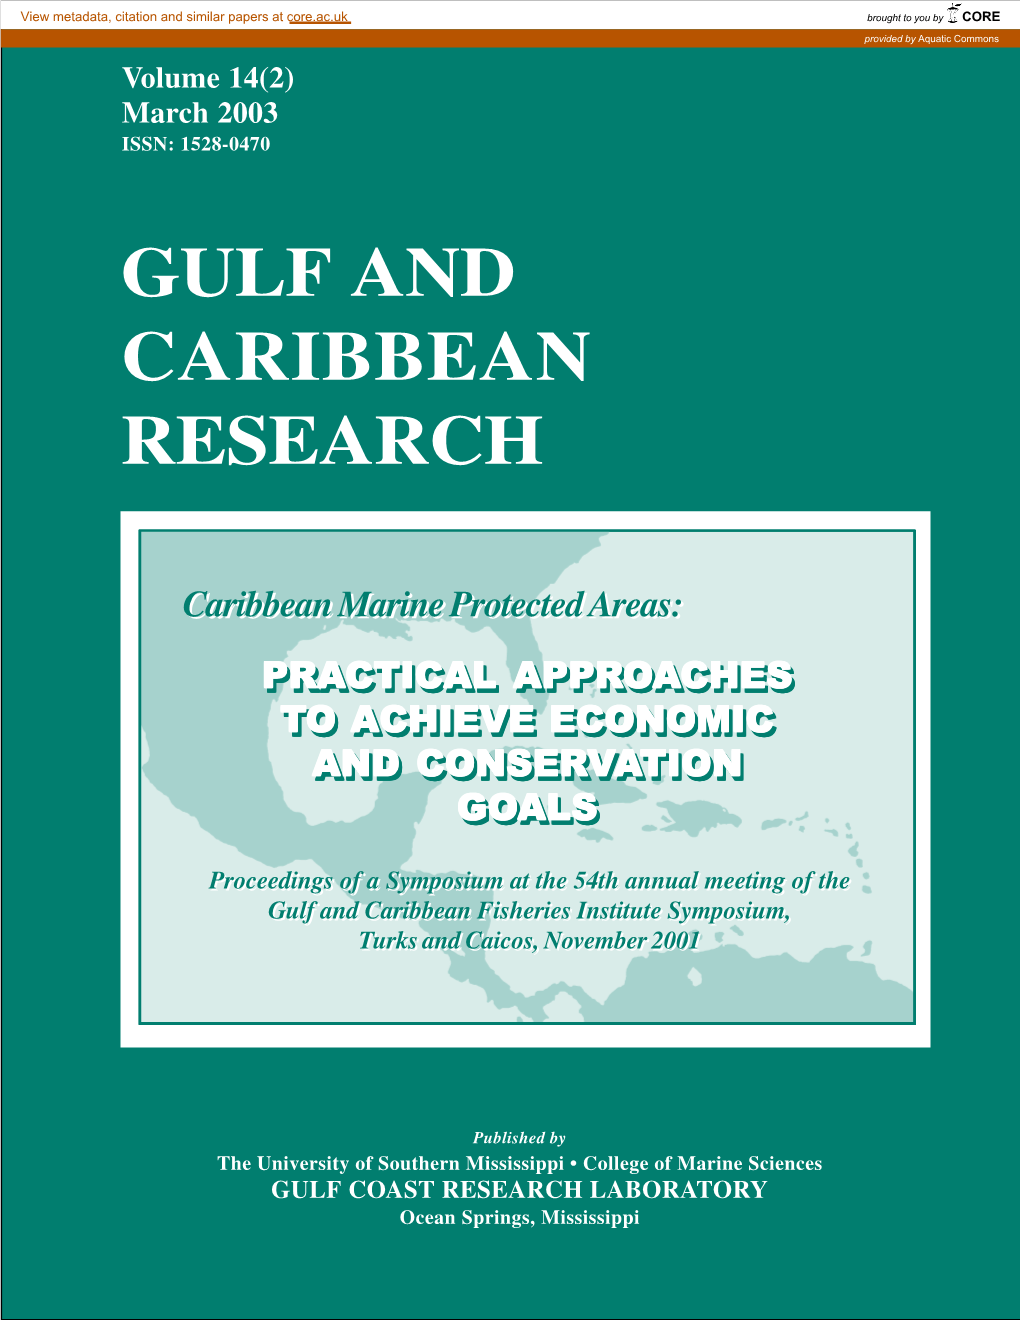 Gulf and Caribbean Research